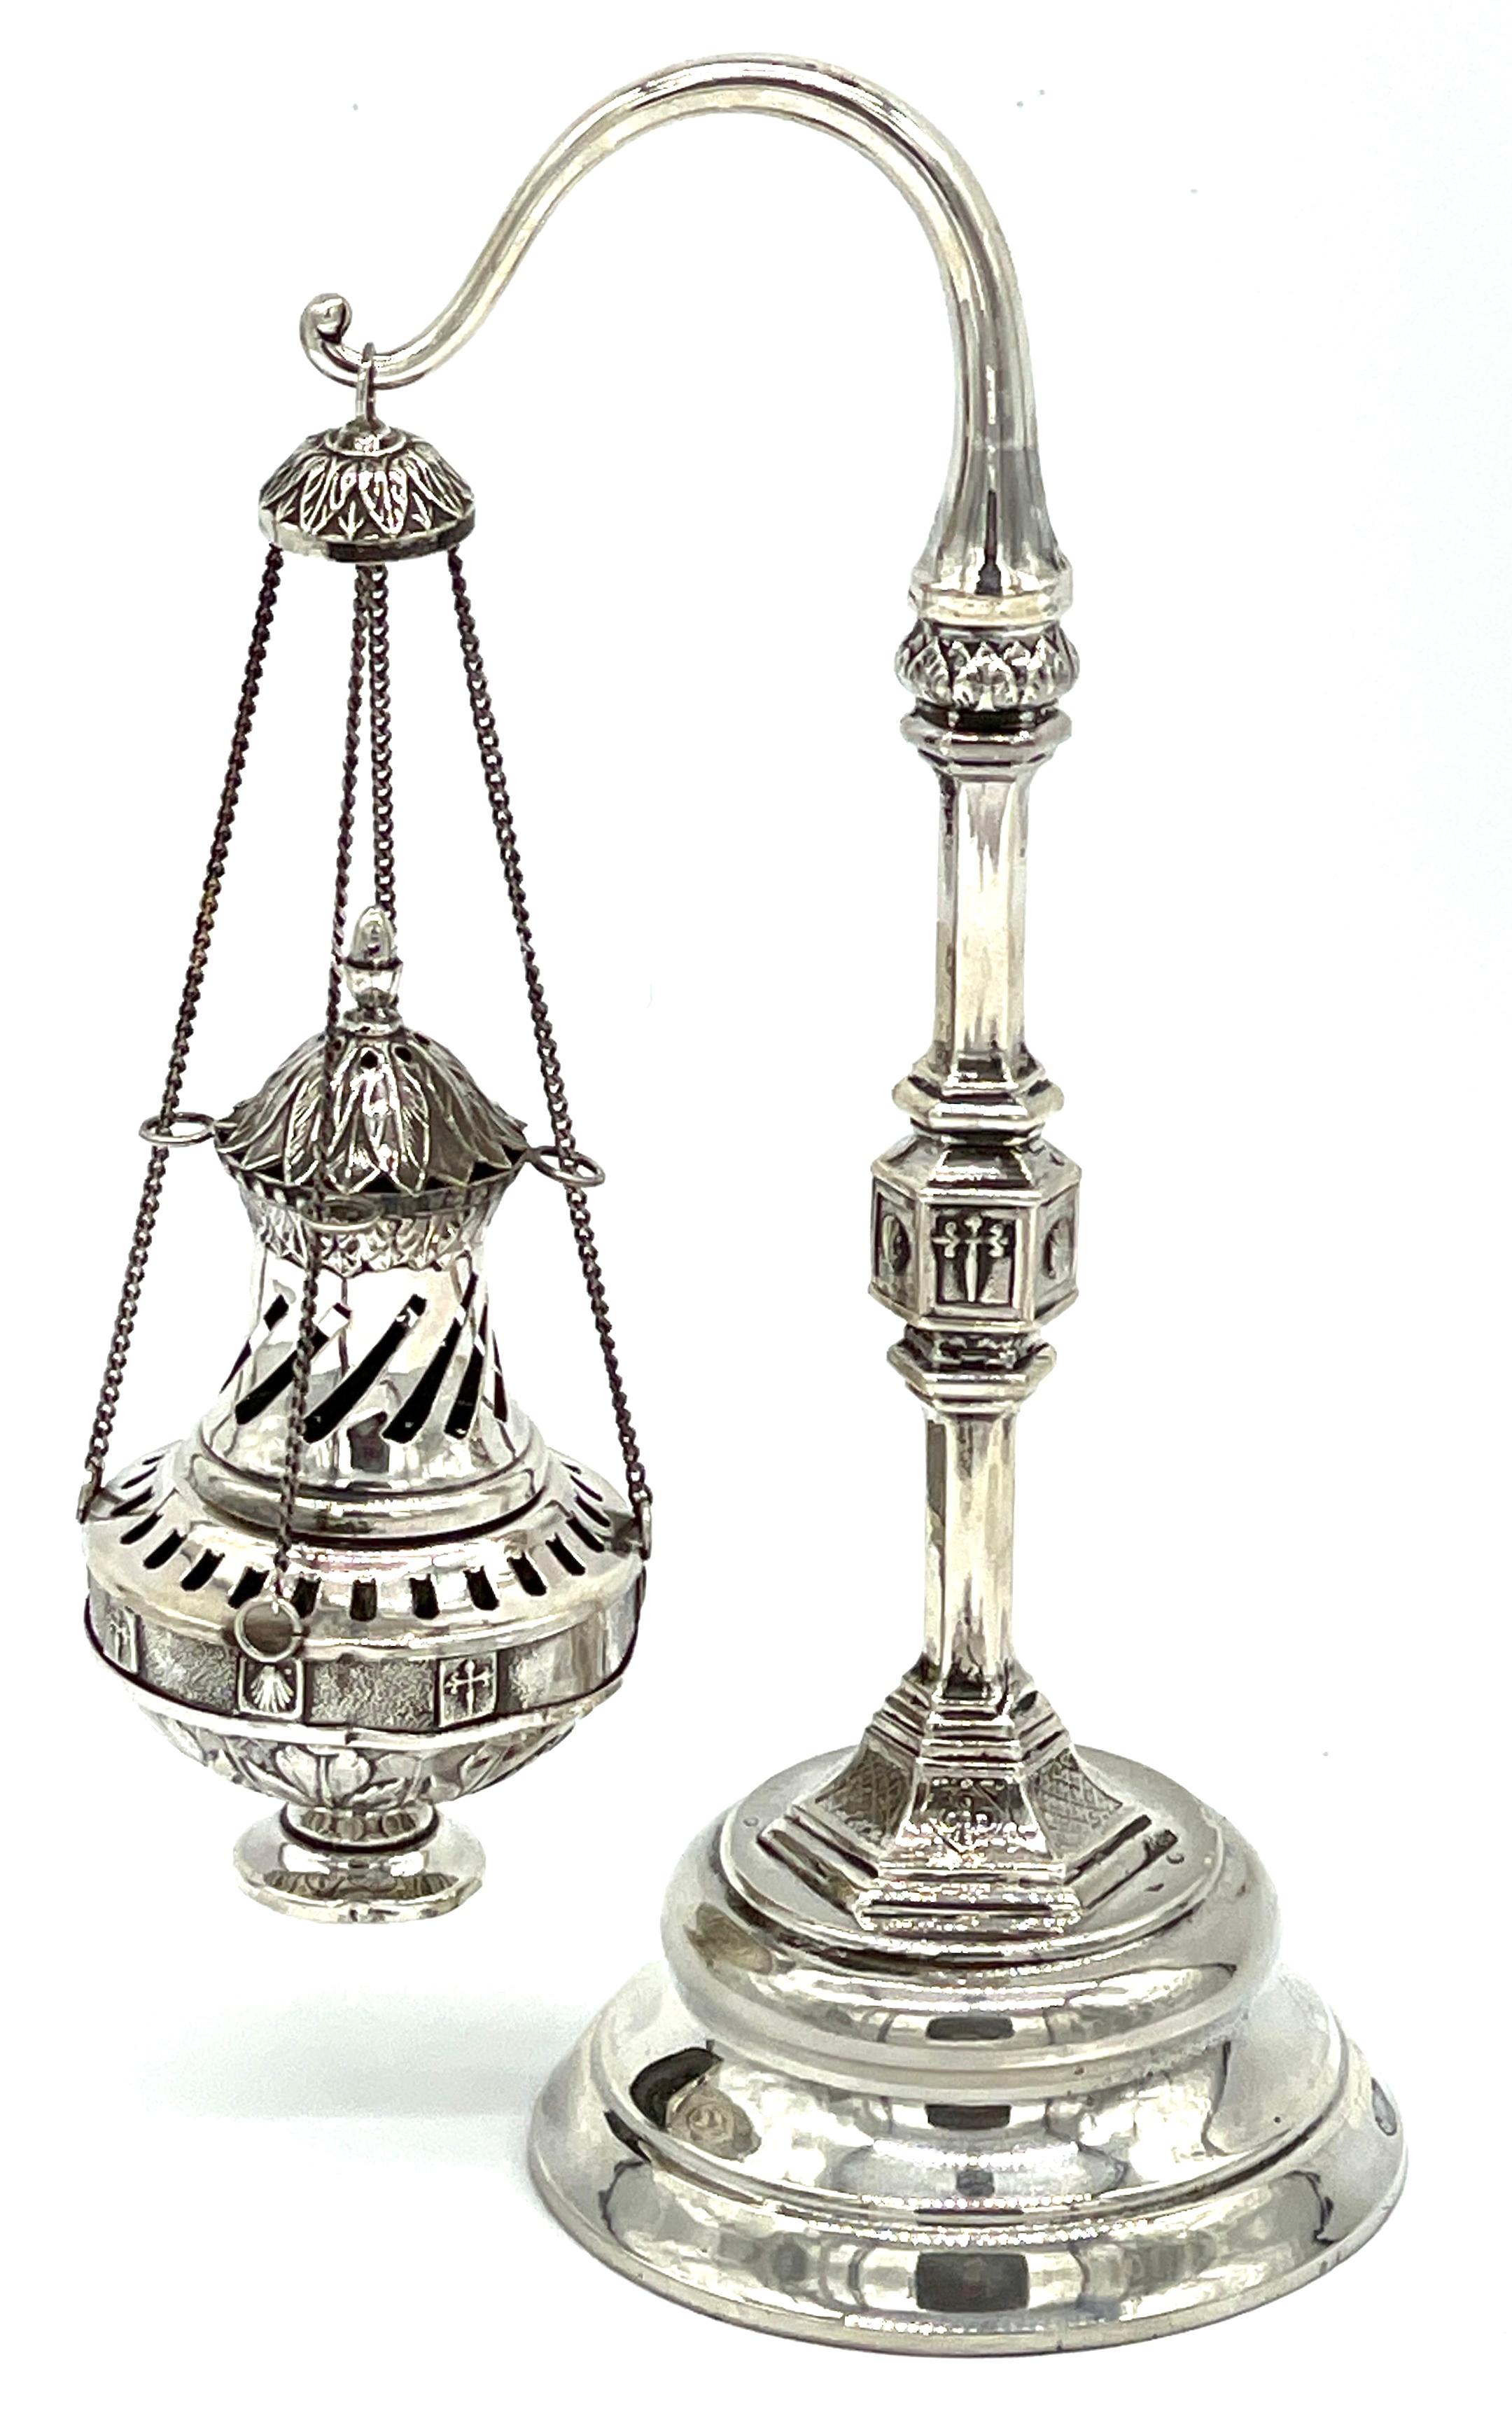 19th Century Spanish Sterling  Ecclesiastical Incense Burner & Stand
Spain, Later 19th Century 
Hallmarked 

we are pleased to offer a rare and remarkable piece of religious artistry with this complete 19th century Spanish sterling Baroque style